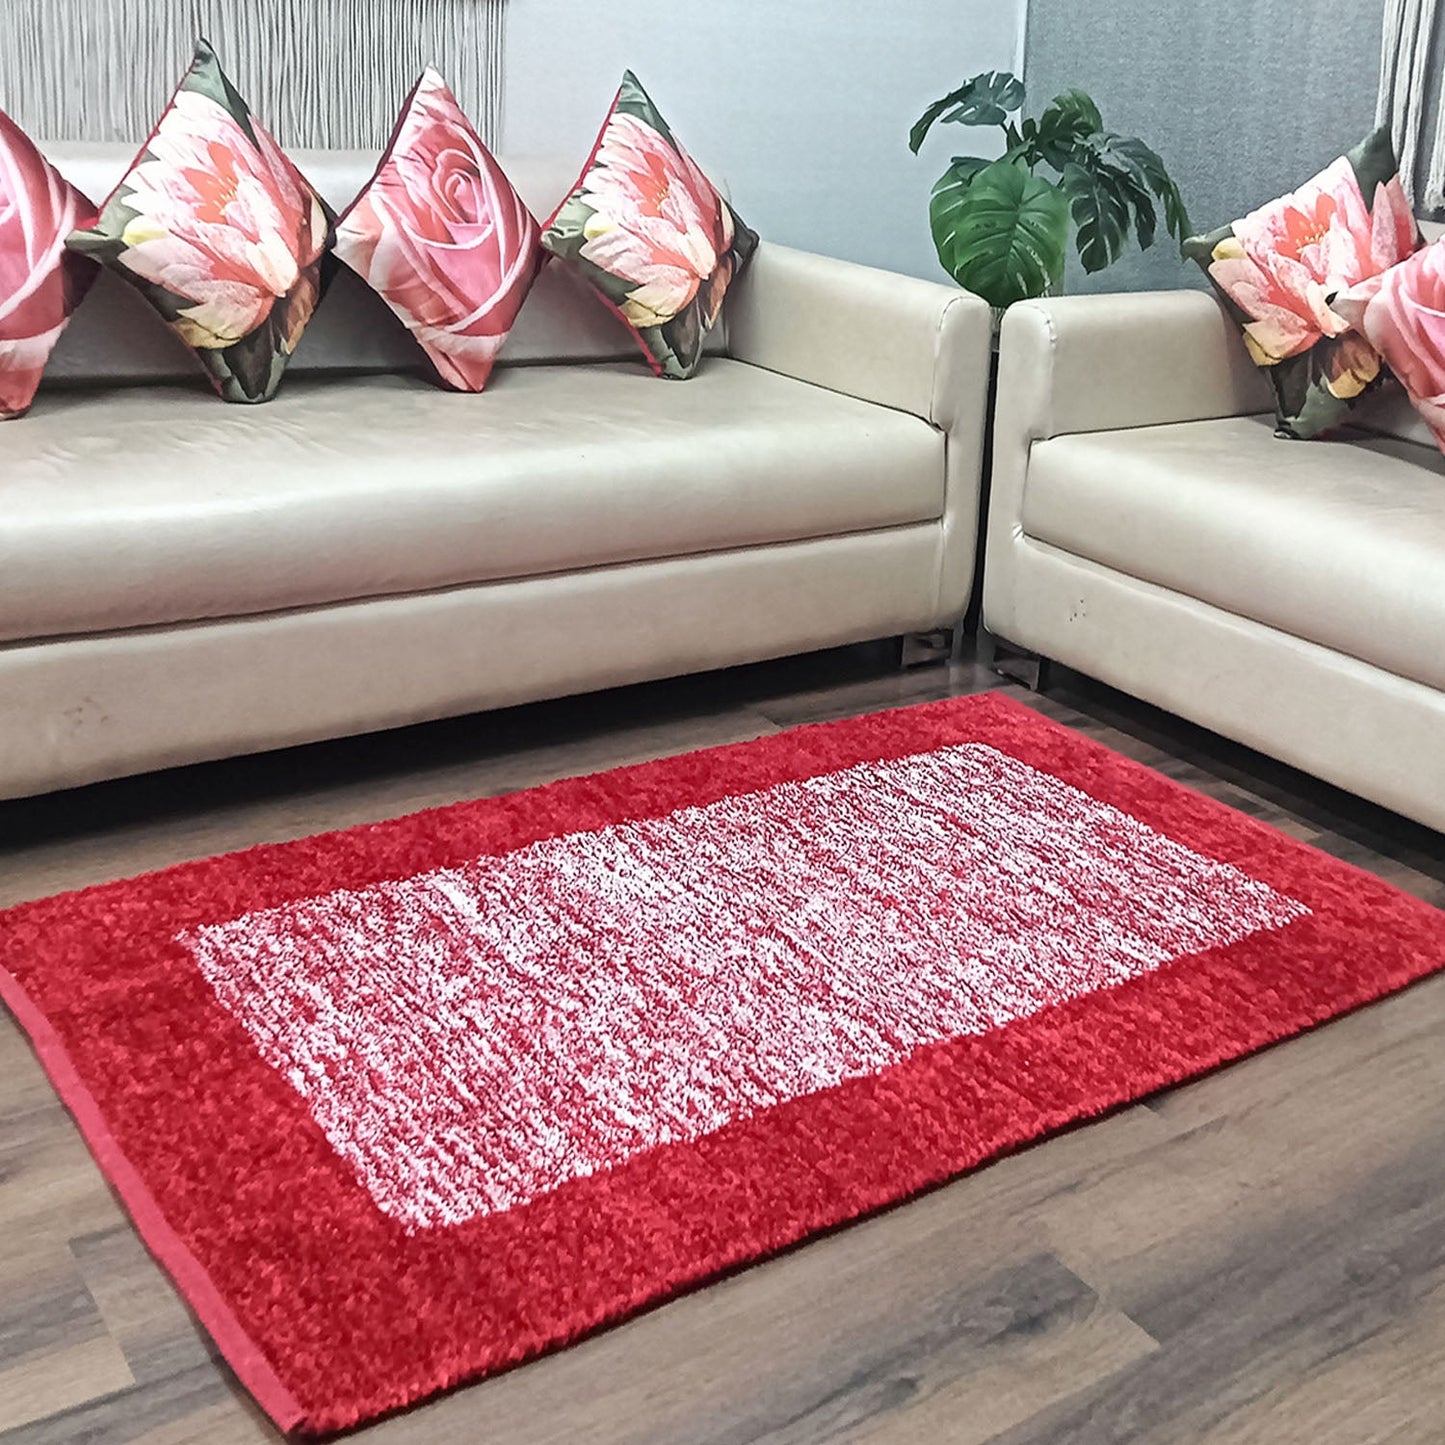 Avioni Handloom Cut Shuttle Rugs by Master Artisans | Feather like Luxurious Silk Soft Touch | Home Washable | Red and White | Reversible - 3 feet x 5 feet (~90 cm x 150 cm)